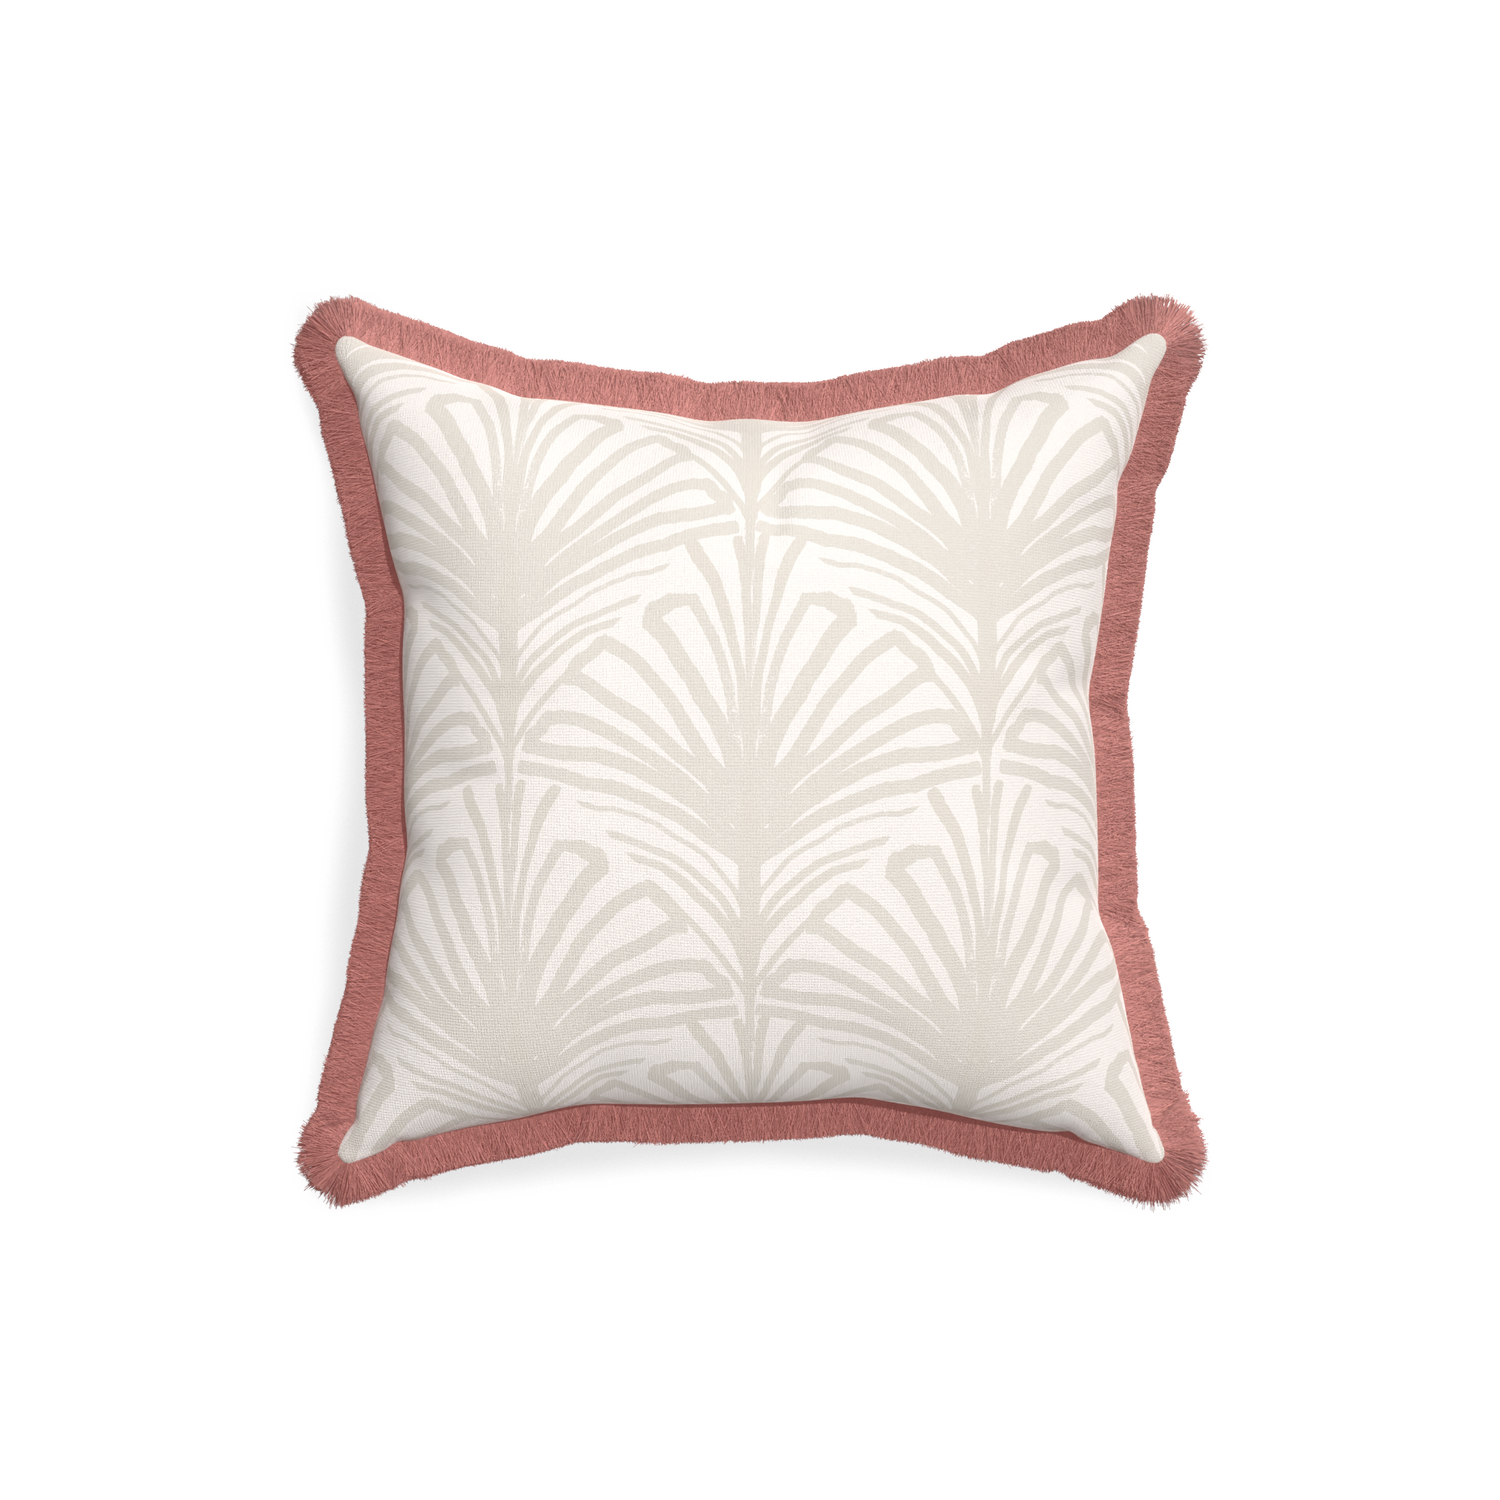 18-square suzy sand custom pillow with d fringe on white background